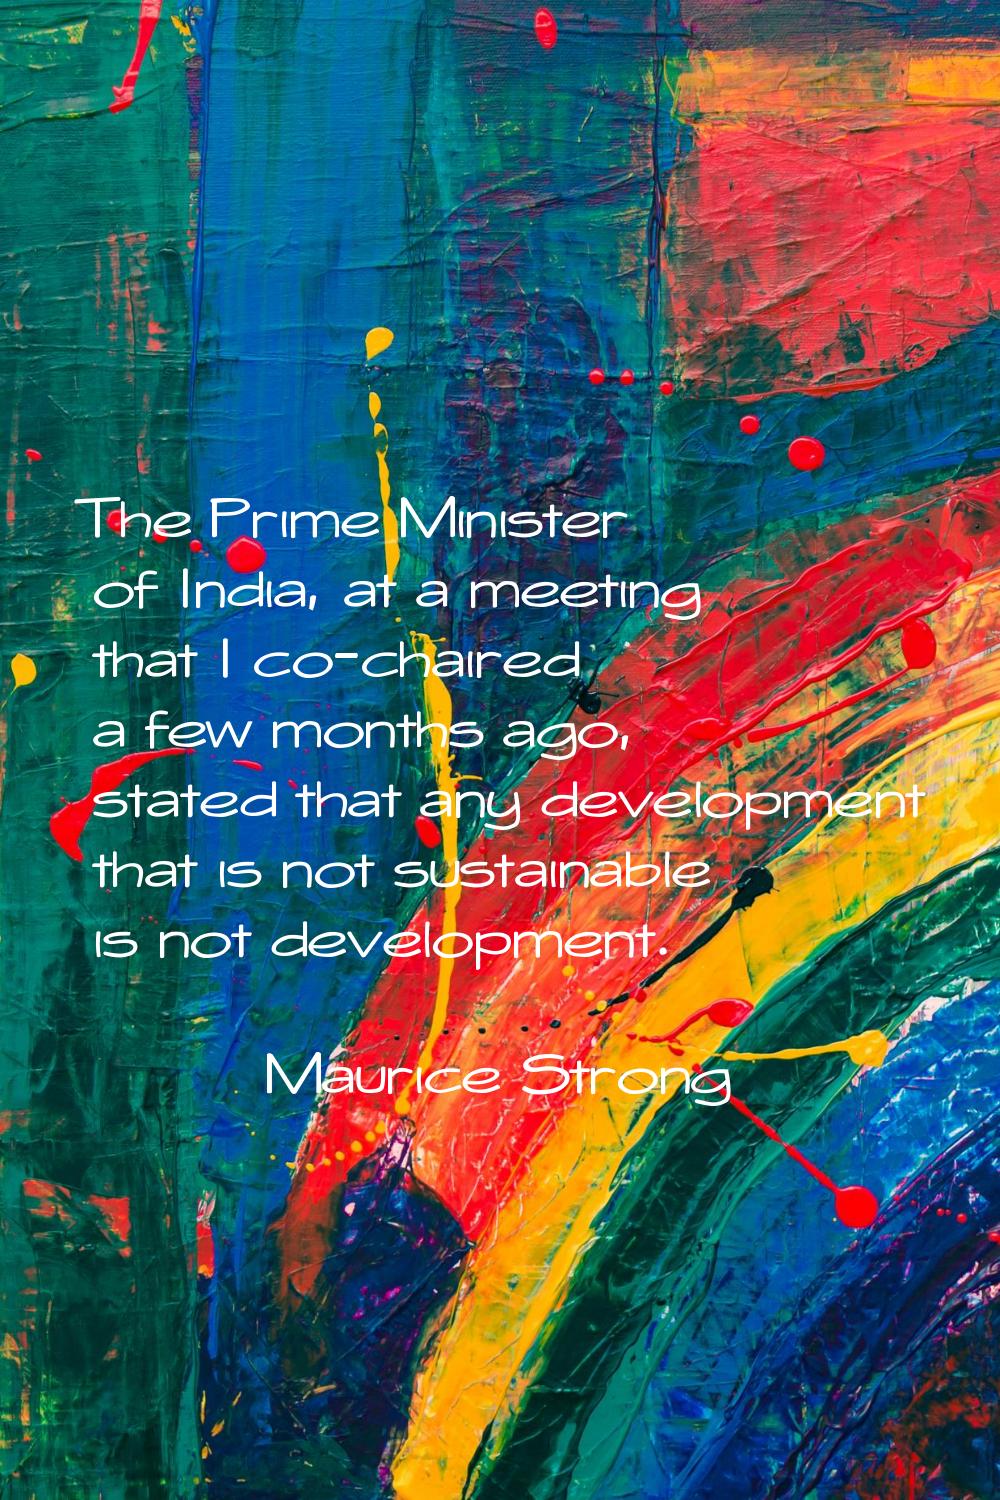 The Prime Minister of India, at a meeting that I co-chaired a few months ago, stated that any devel